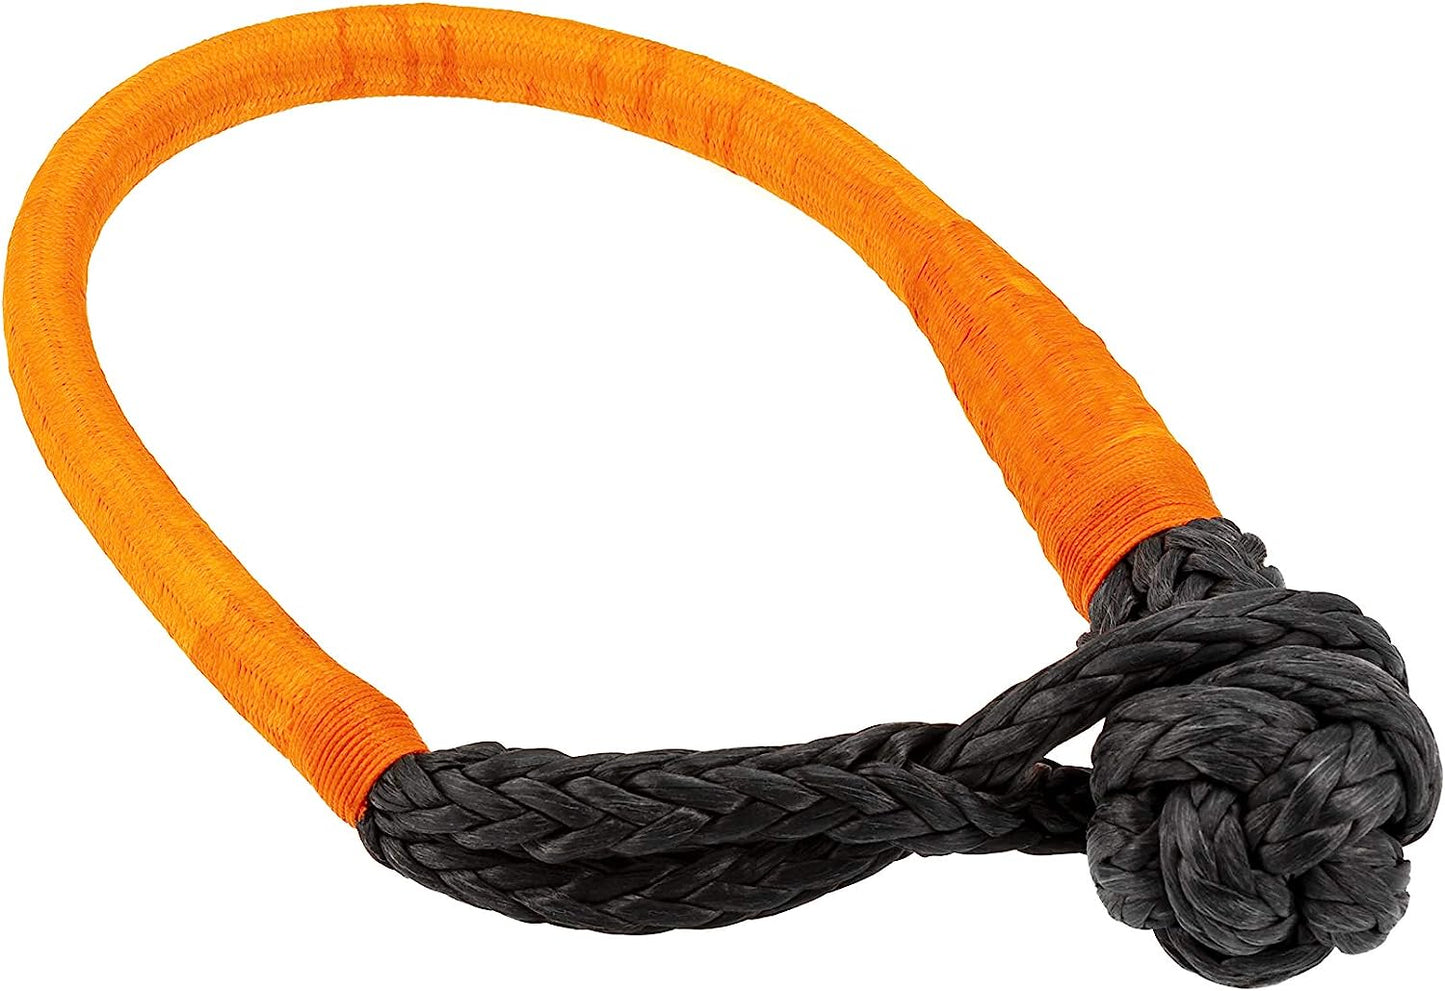 ARB ARB2018 Soft Rope Recovery Connect Shackle up to 32000 Lbs / 14.5 Ton, Includes Mesh Gift Bag